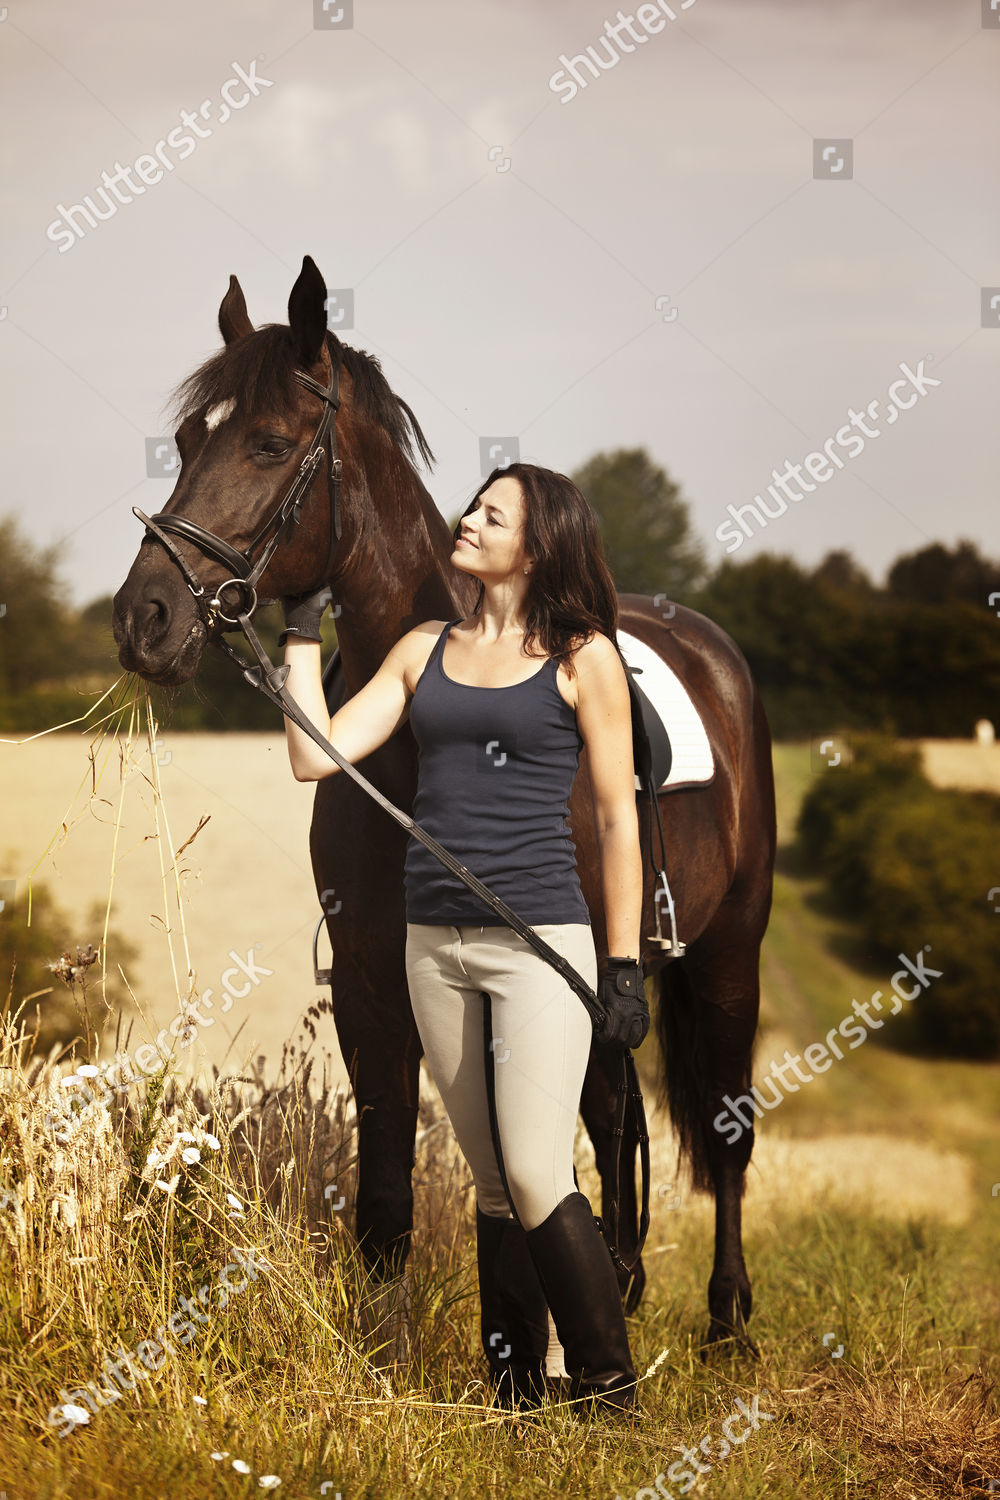 Holding a Horse 25985-holding-a-horse.jpg